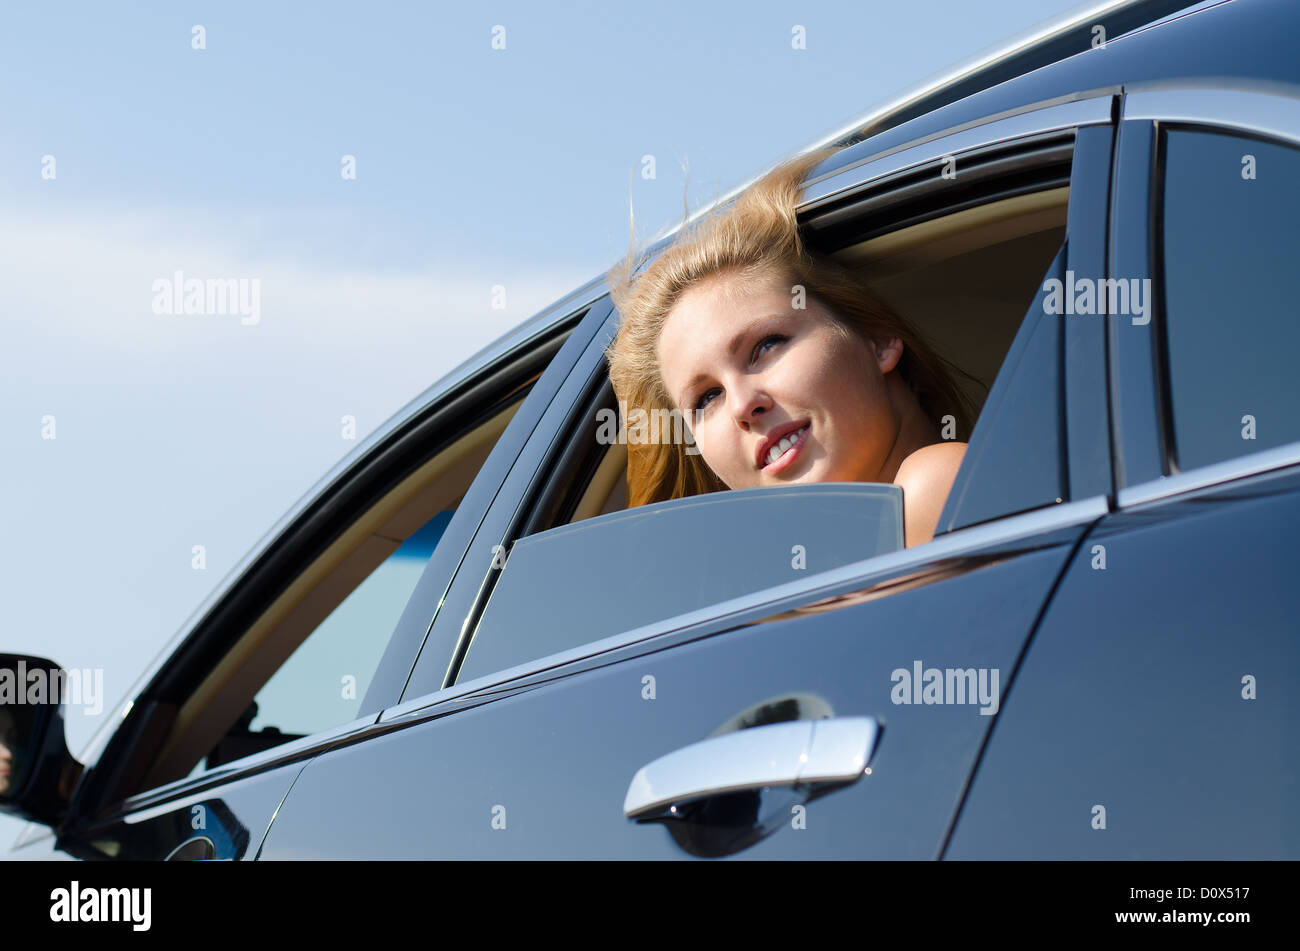 Low angle view of a young woman car passenger peering out of the open window of the vehicle Stock Photo